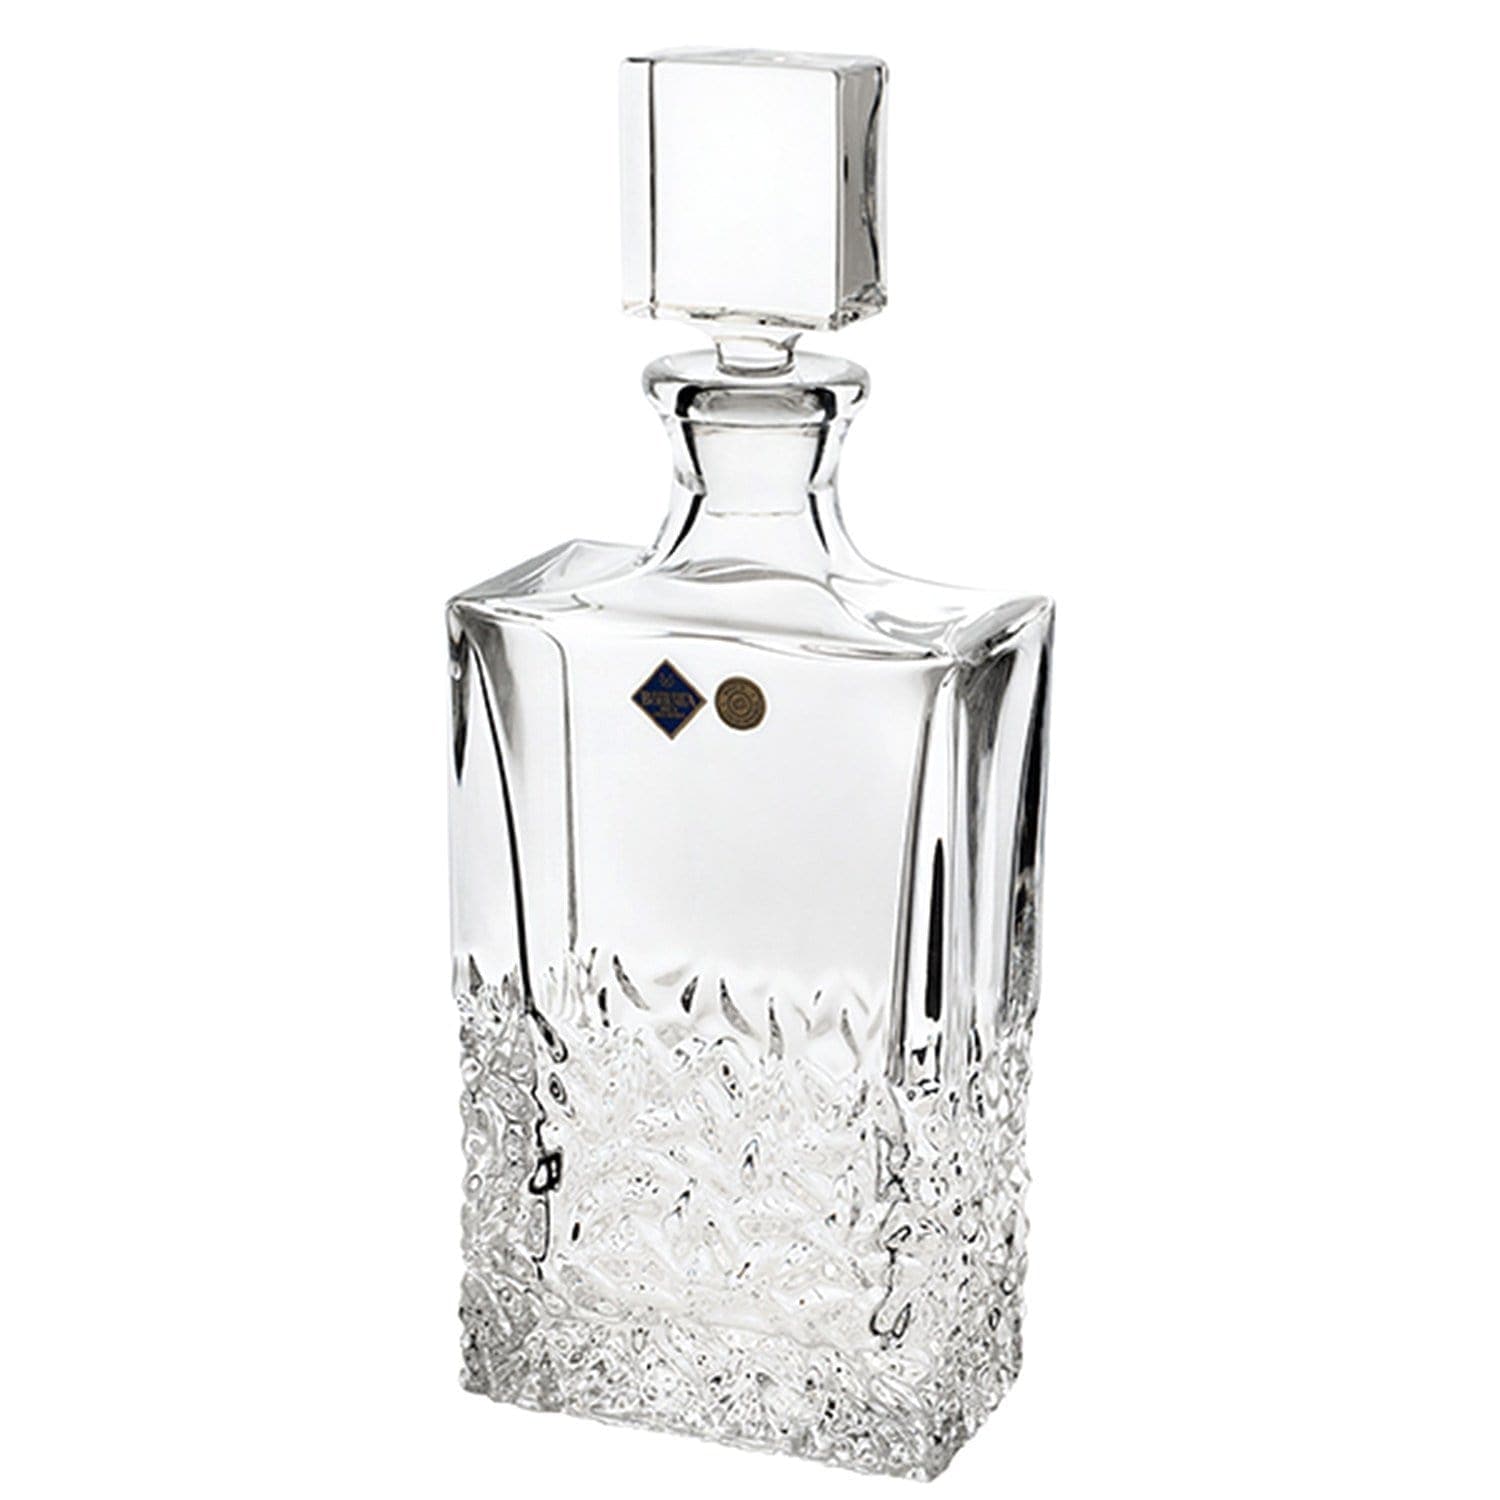 Che Crystal Nicolette Decanter - Clear, 1 Litre - 1/93K62/100 - Jashanmal Home